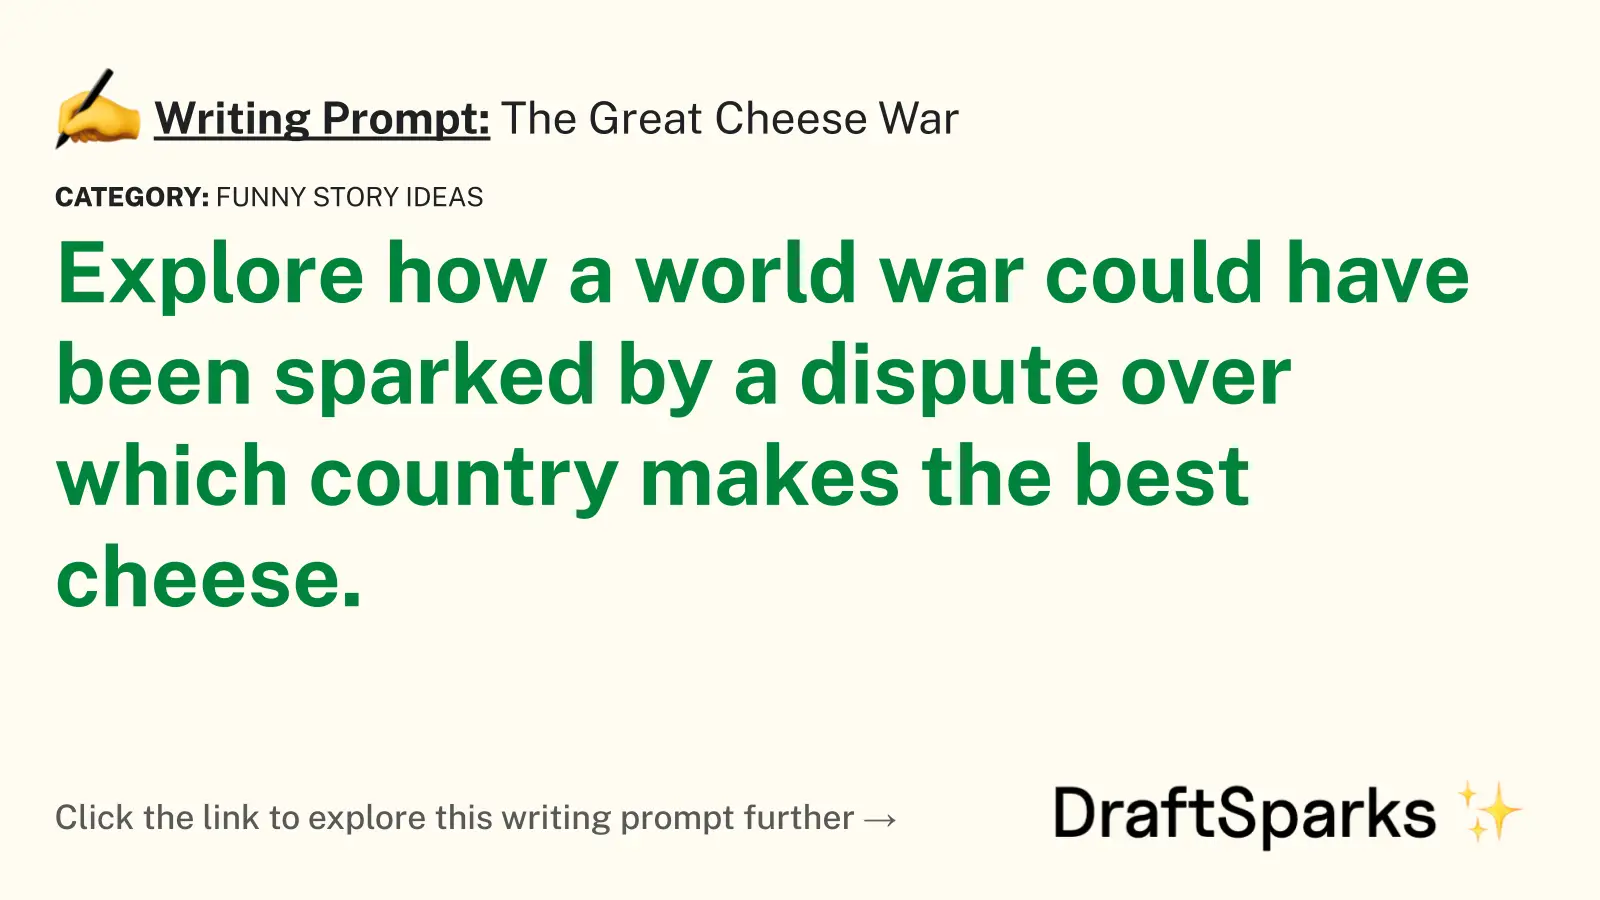 The Great Cheese War